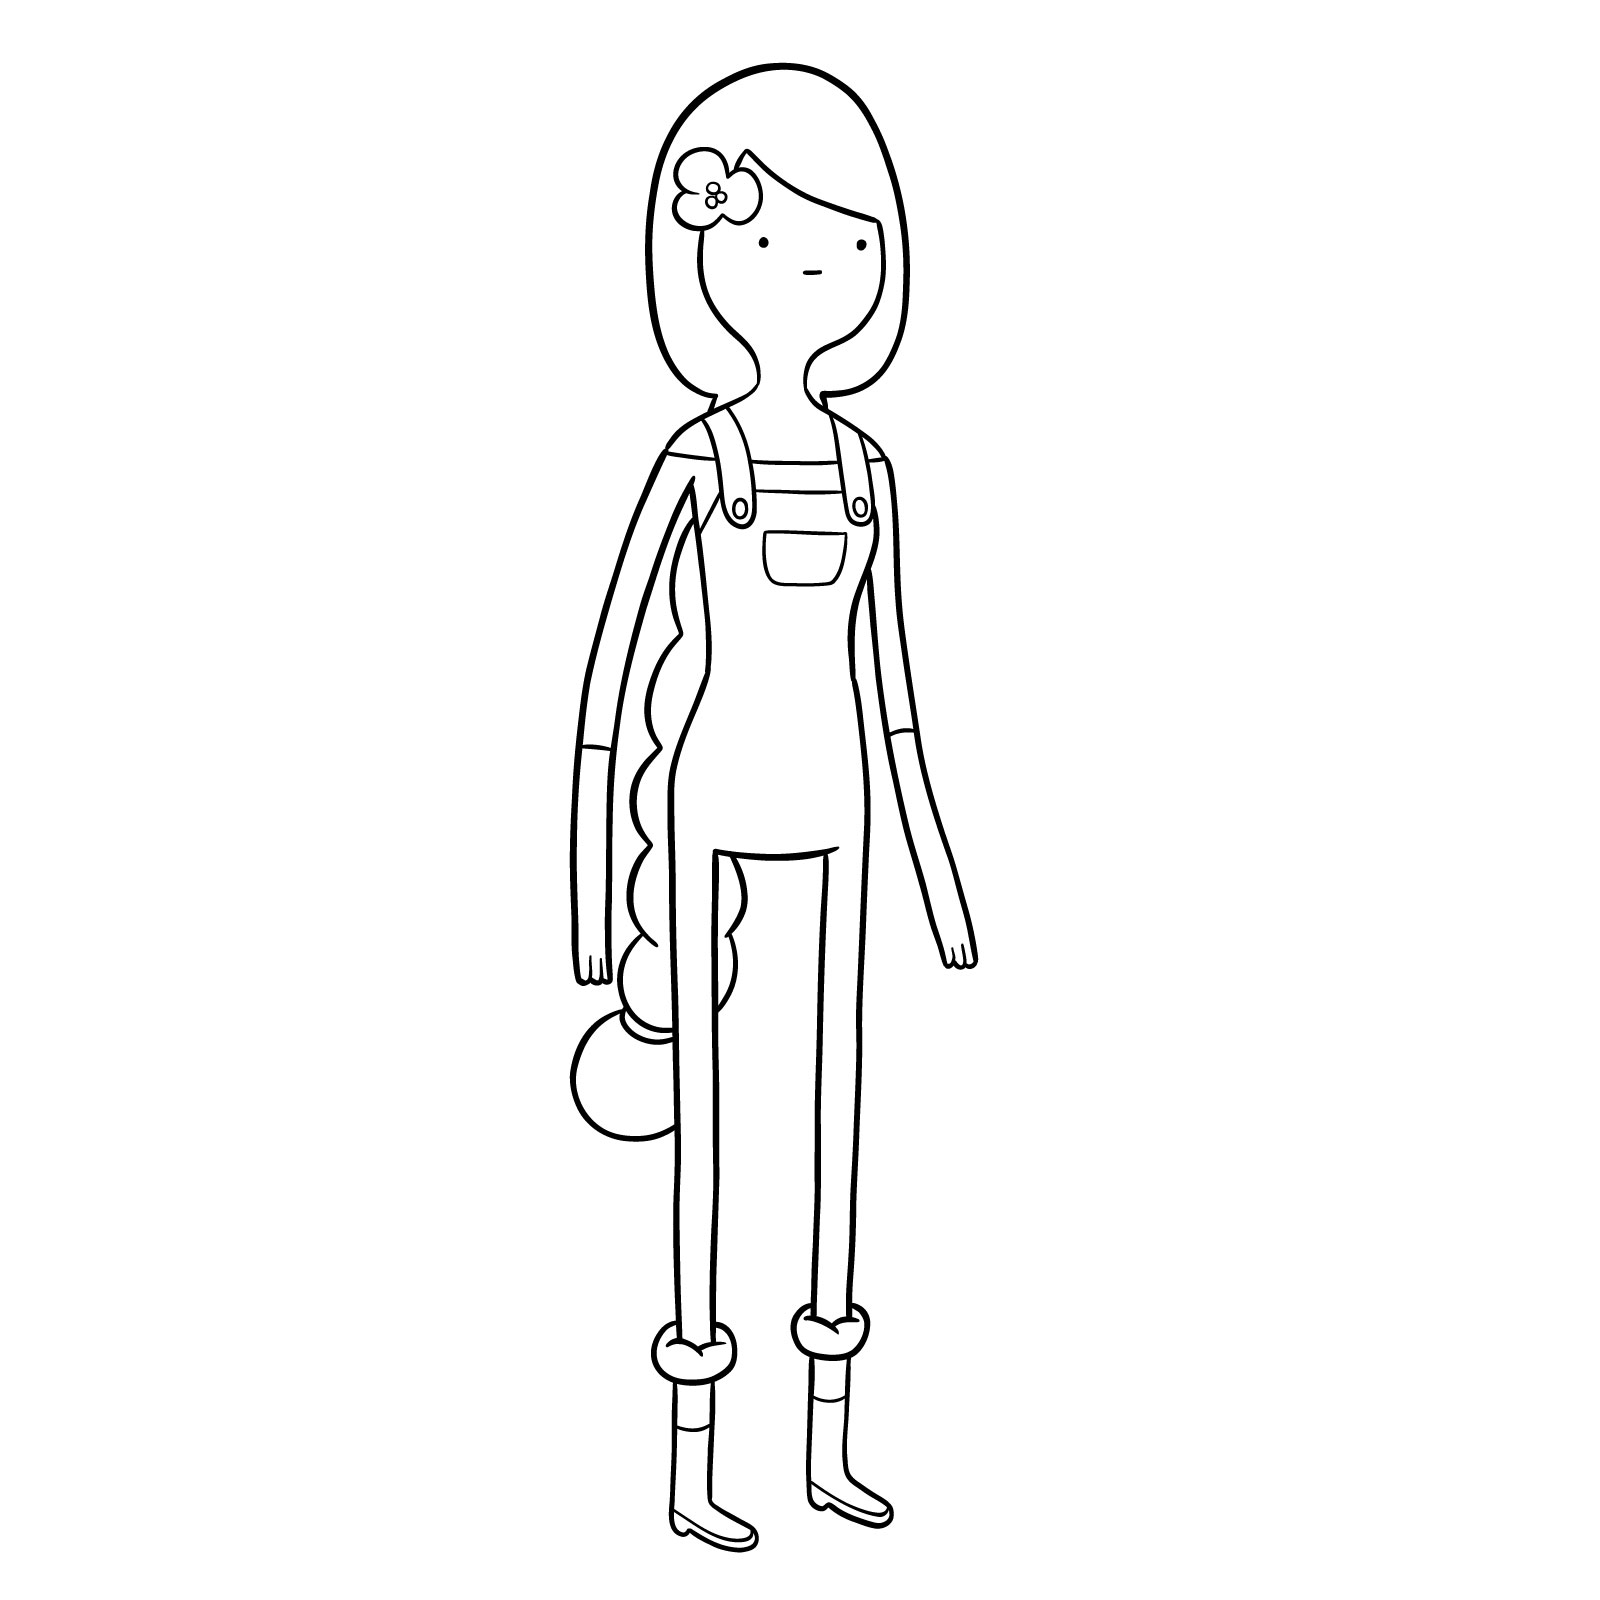 How to draw Princess Bubblegum from Bonnie and Neddy - final step